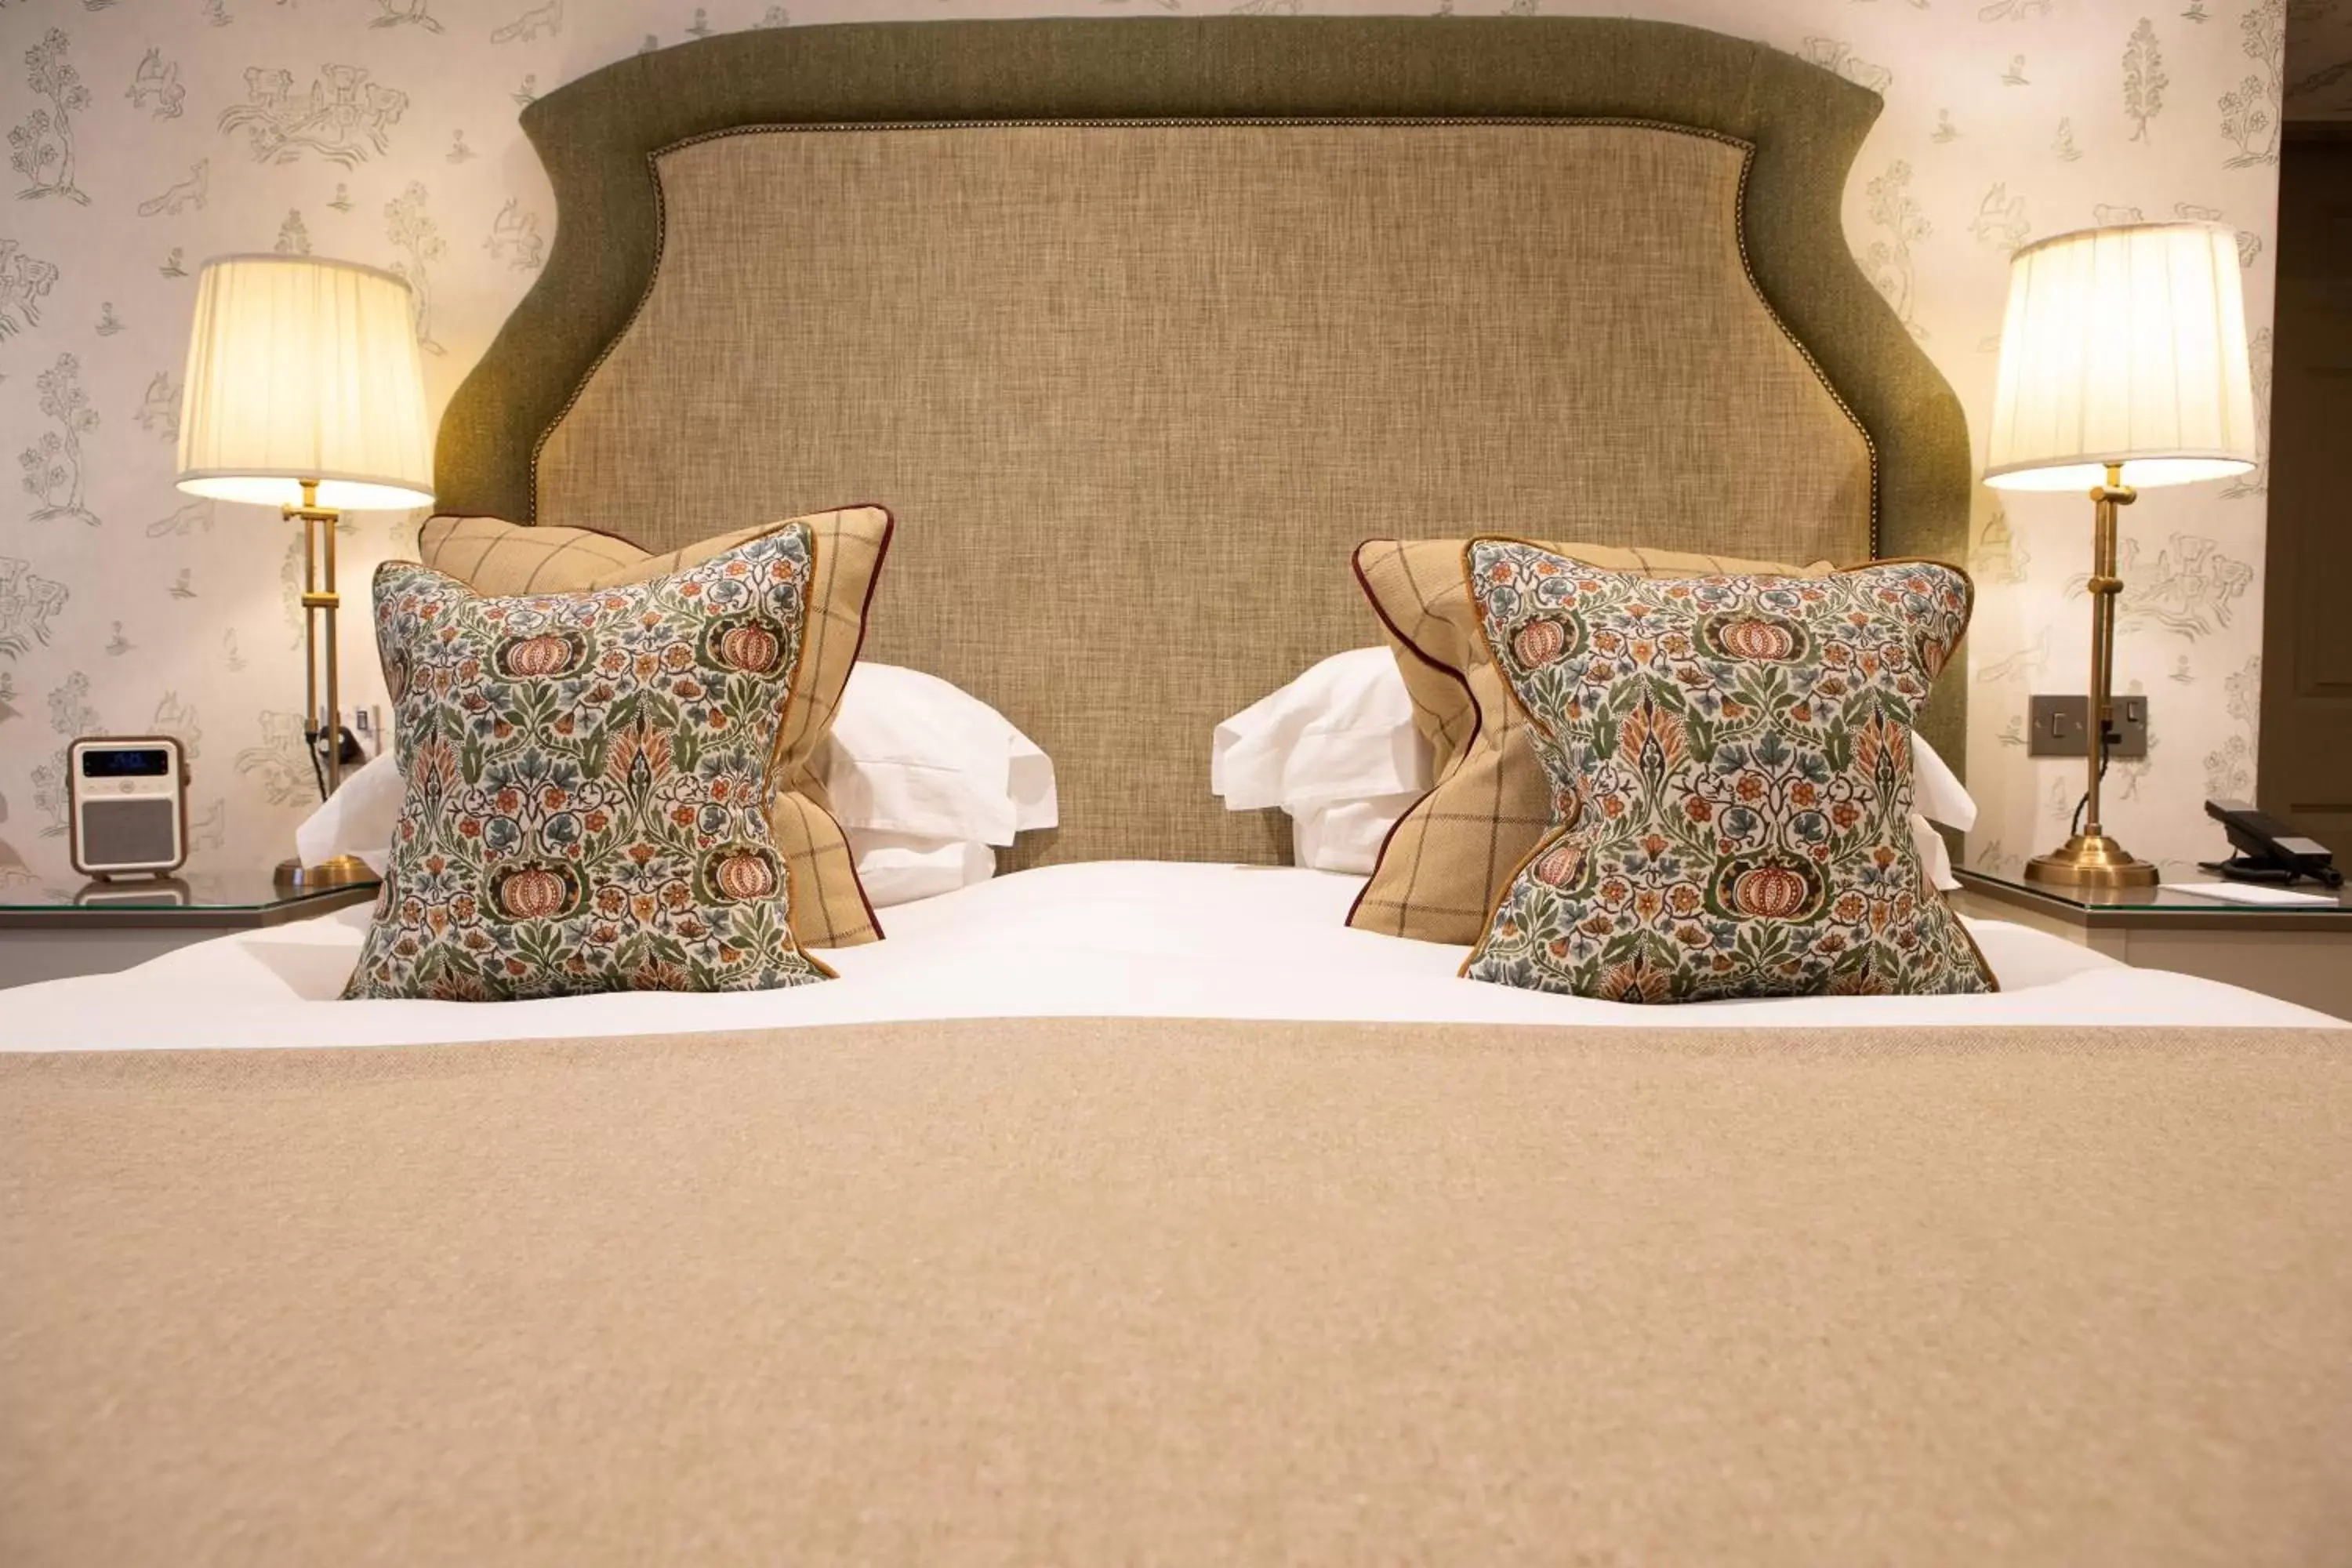 Decorative detail, Bed in Rothay Manor Hotel